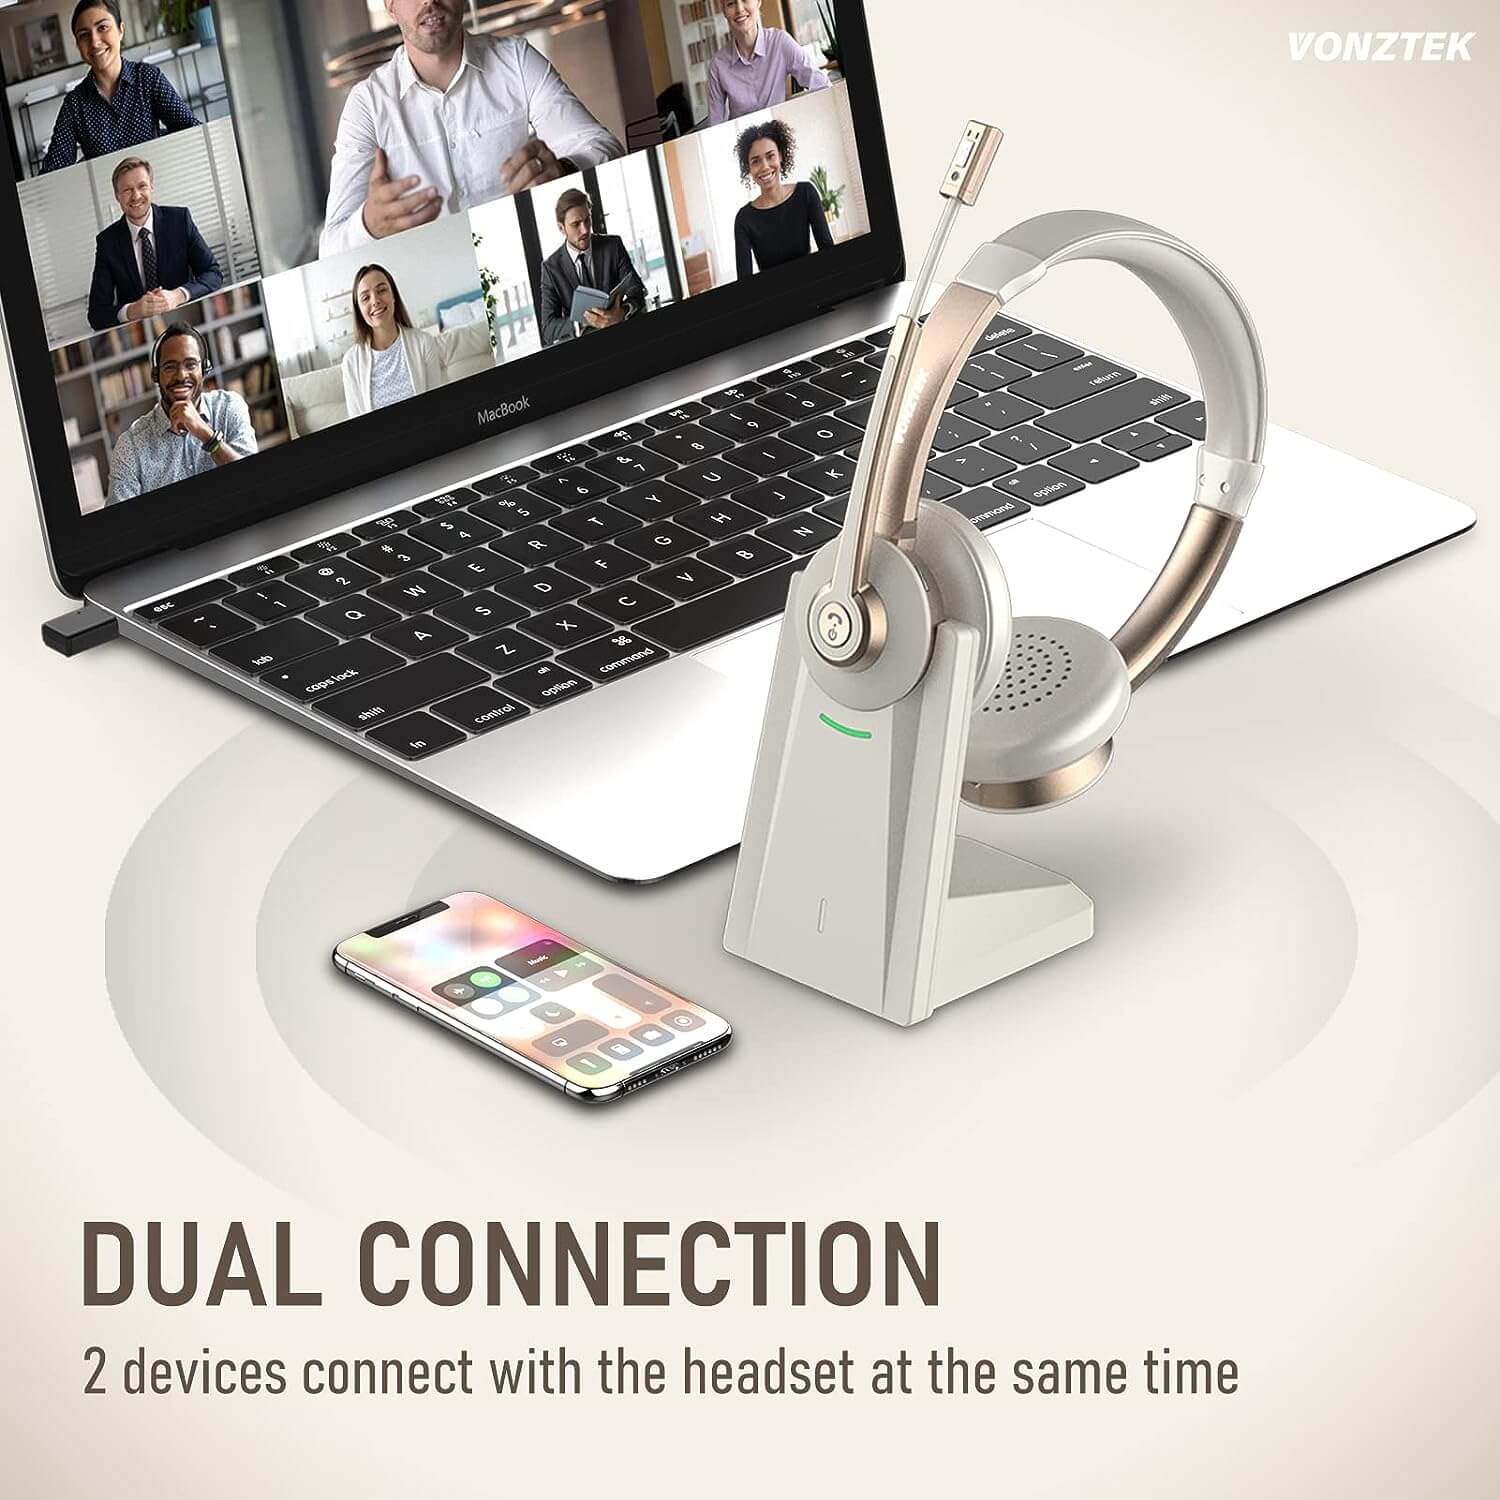 Dual connection,2 devices connect with the headset at the same time.